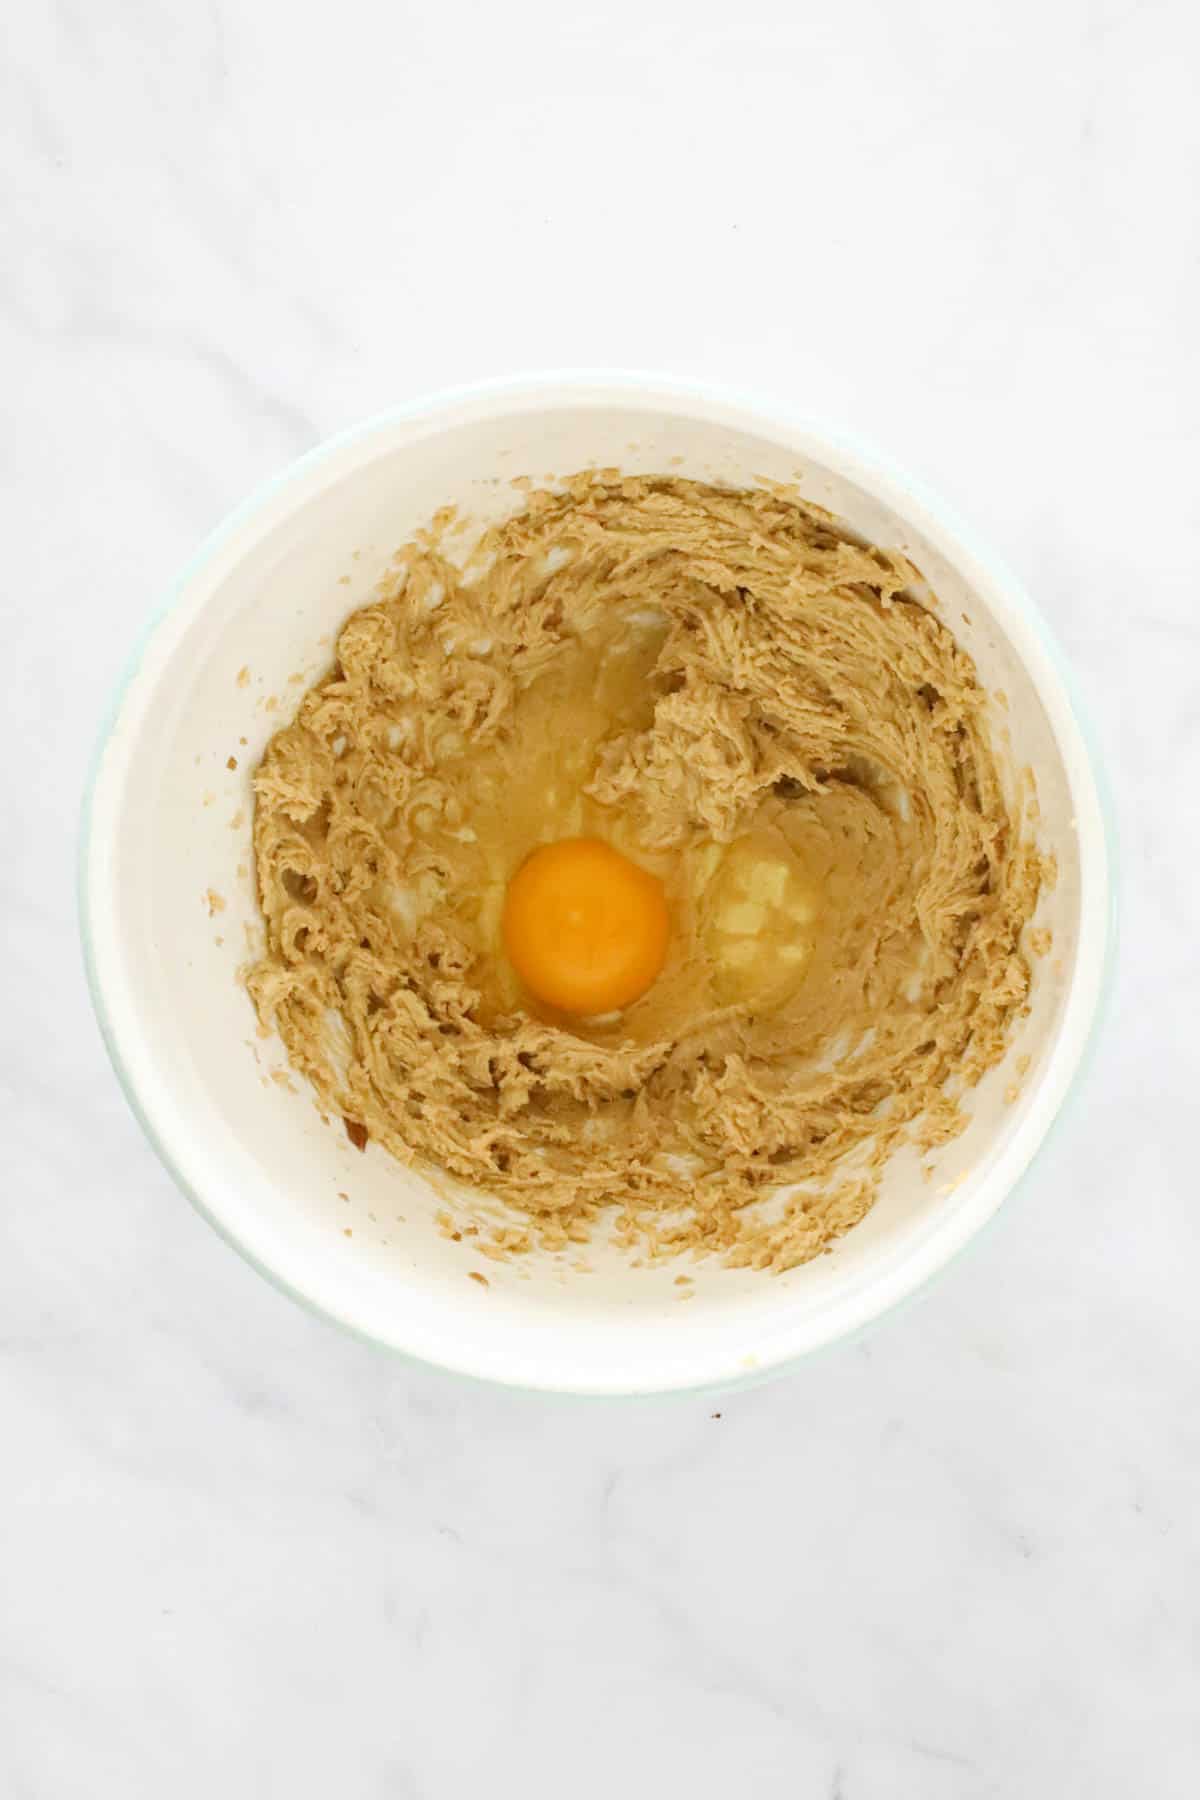 An egg added to creamed butter and sugar mixture.